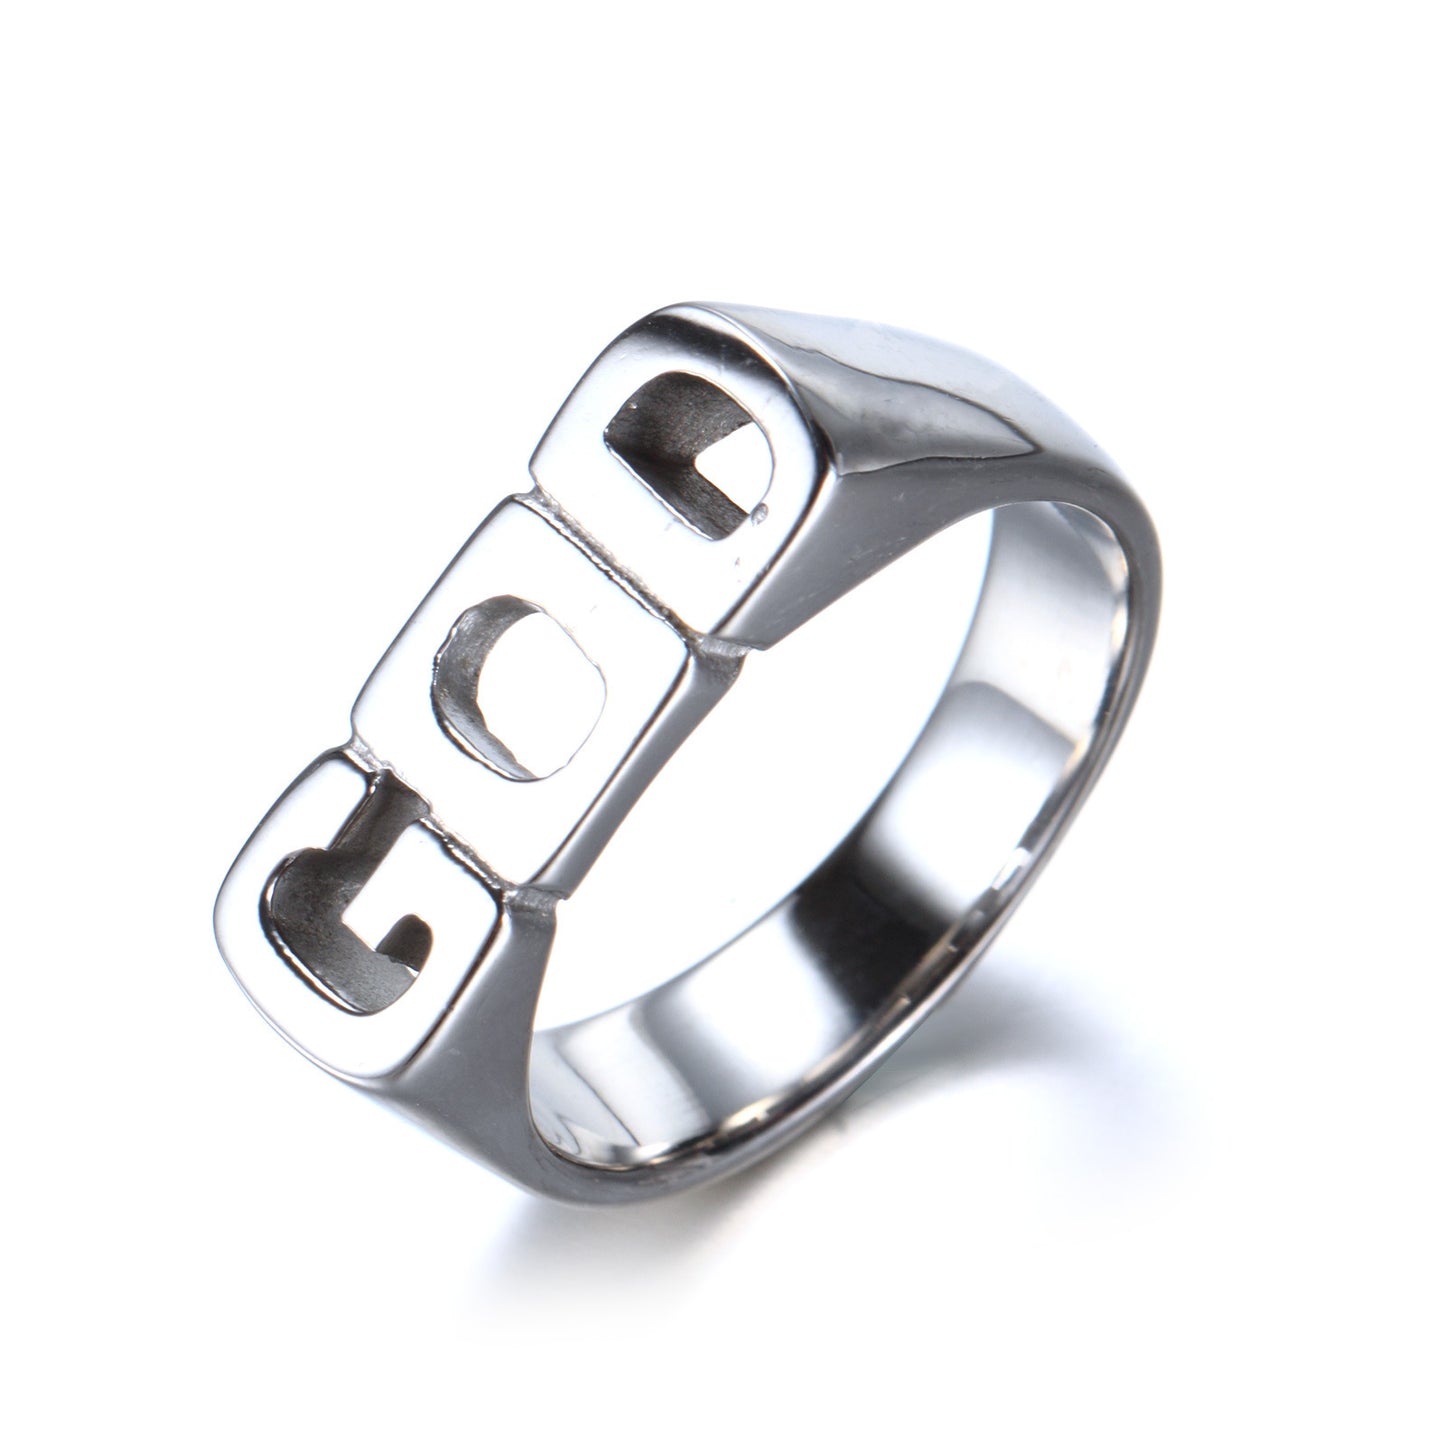 Get the Iconic Stainless Steel GOD Ring